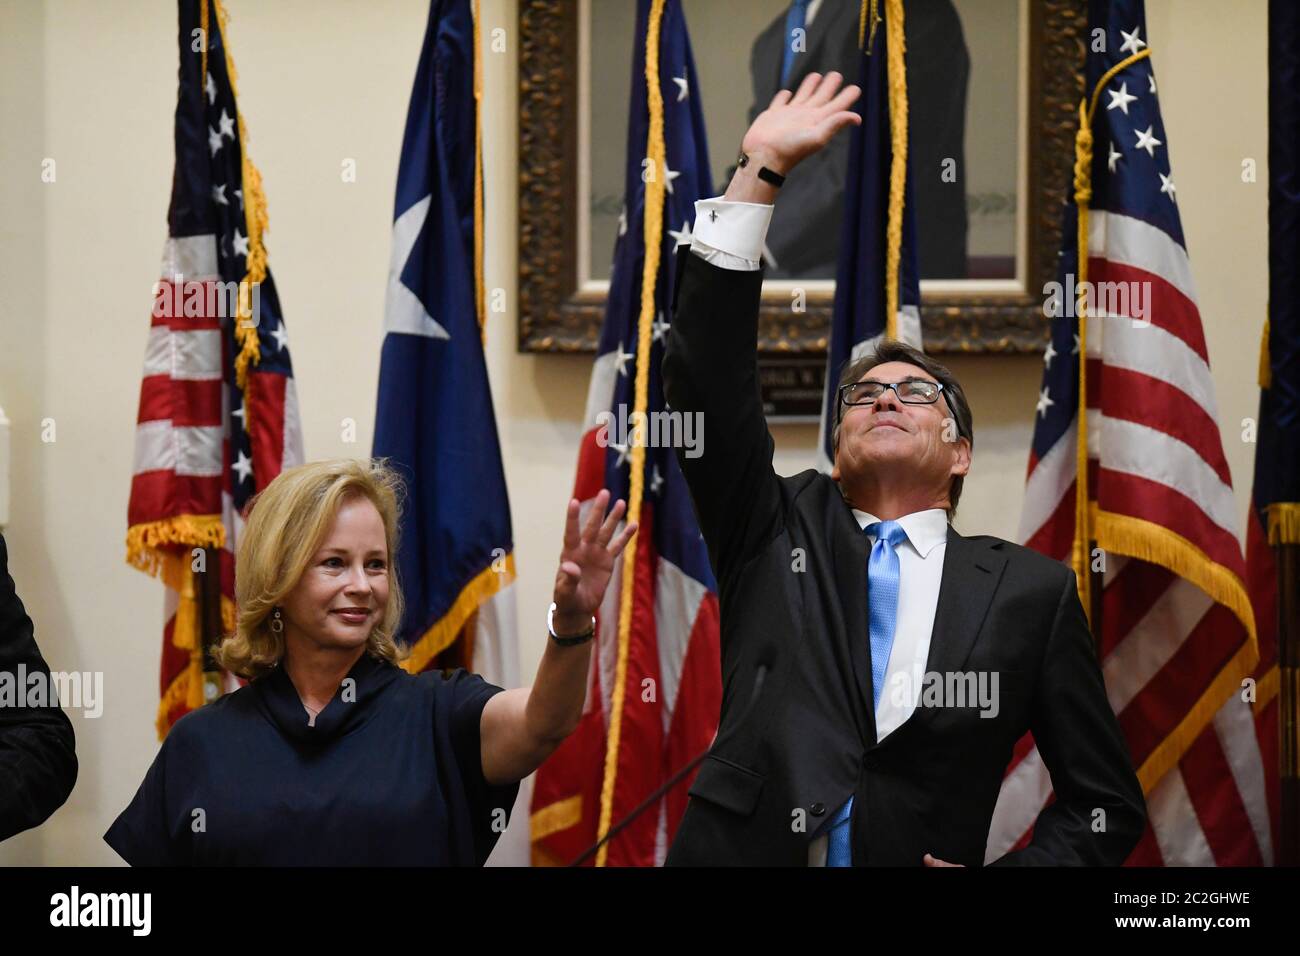 Austin Texas USA, May 6, 2016: Former Texas Governor Rick Perry, with wife and former first lady Anita Perry on the left, is honored as his official portrait is unveiled in ceremonies at the Texas Capitol. Perry, the 47th governor of Texas, was in office for 14 years after George W. Bush rose to the U.S. presidency in 2001.   ©Bob Daemmrich Stock Photo